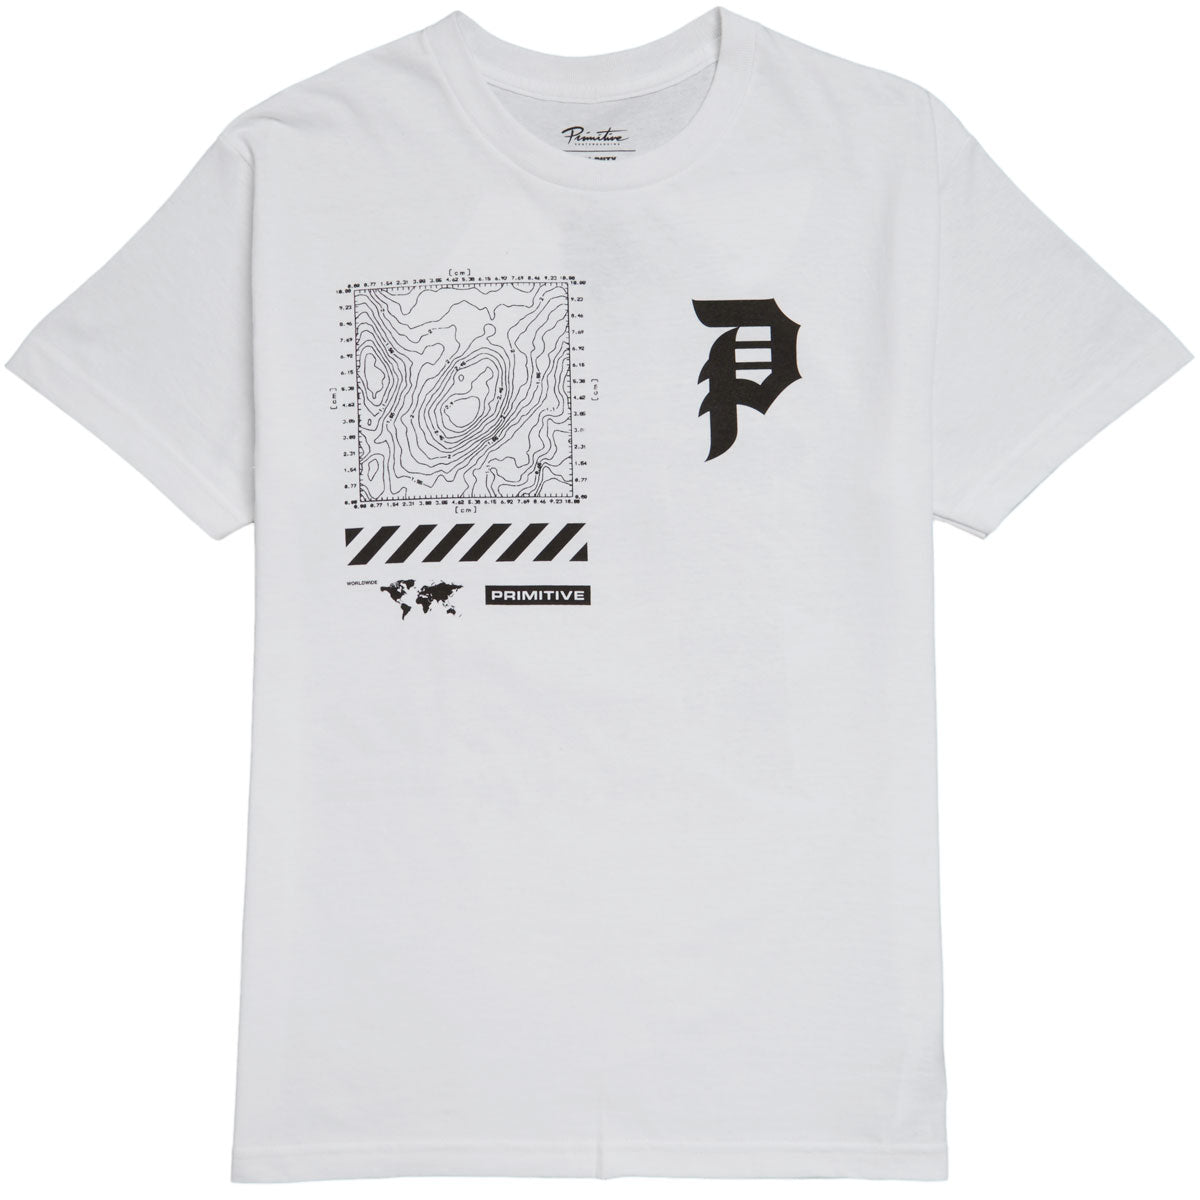 Primitive x Call Of Duty Mapping Dirty P T-Shirt - White image 1